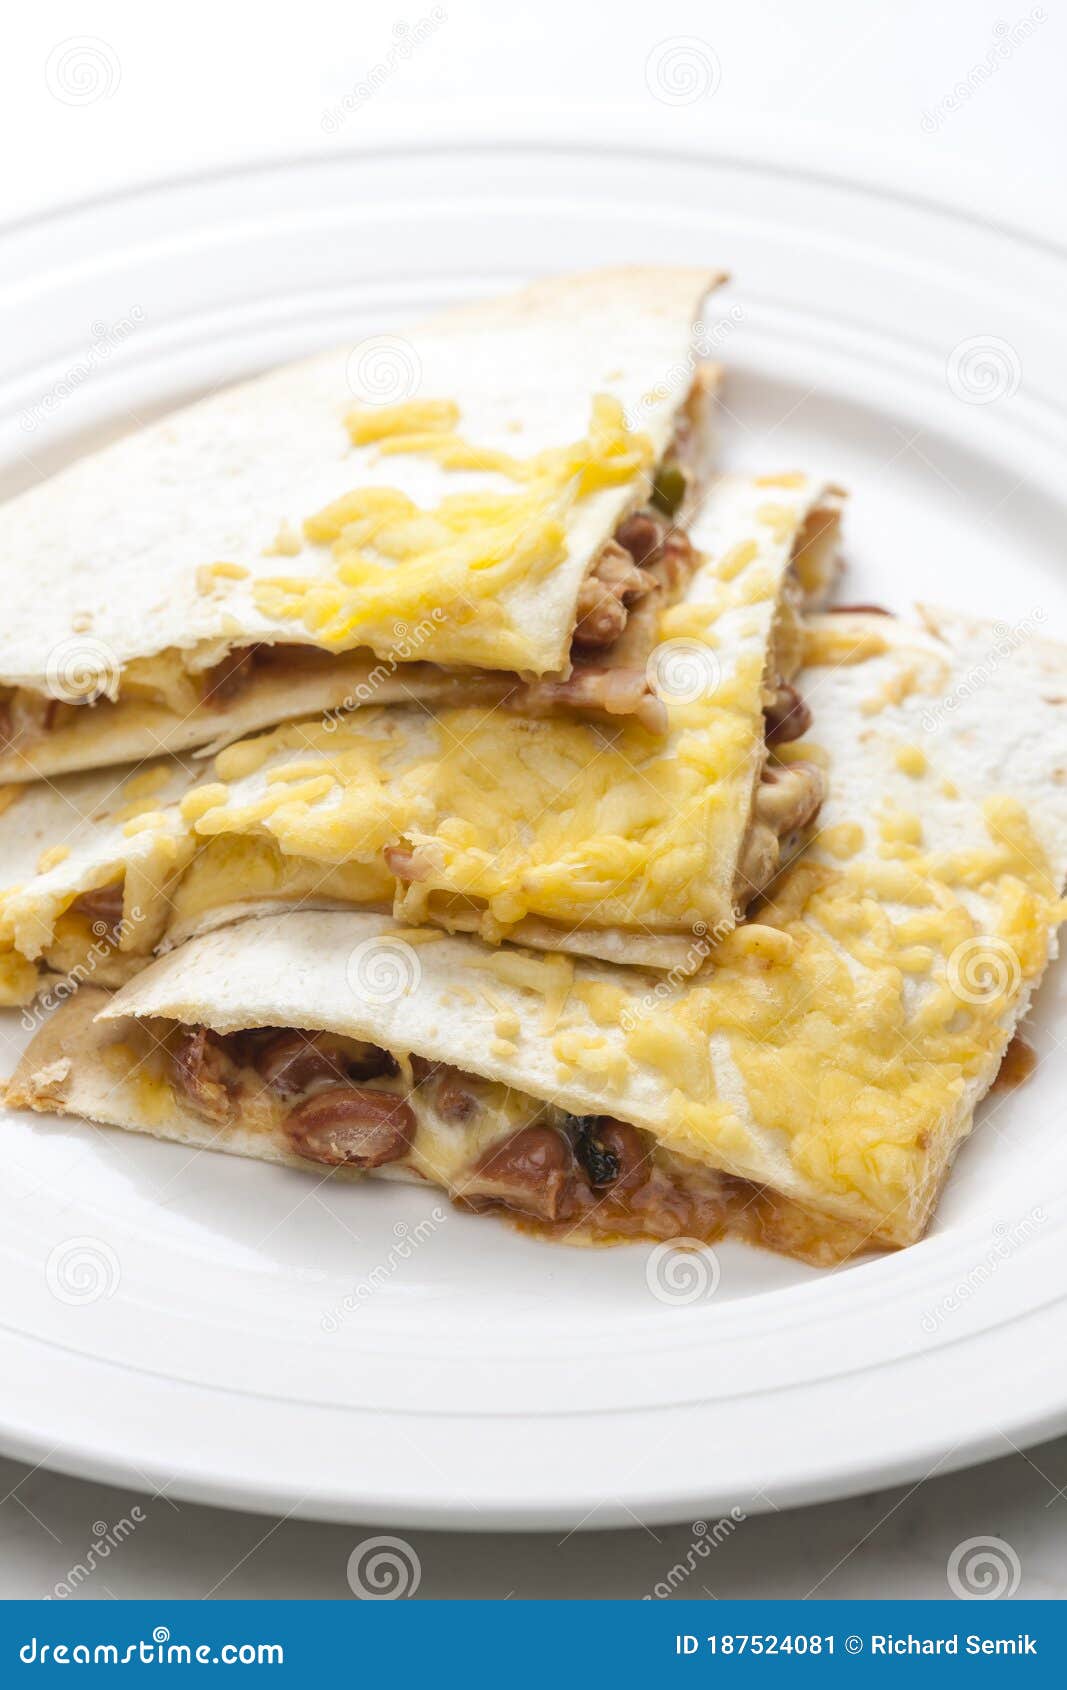 Quesadilla Filled with Beans and Chedar Cheese Stock Image - Image of ...